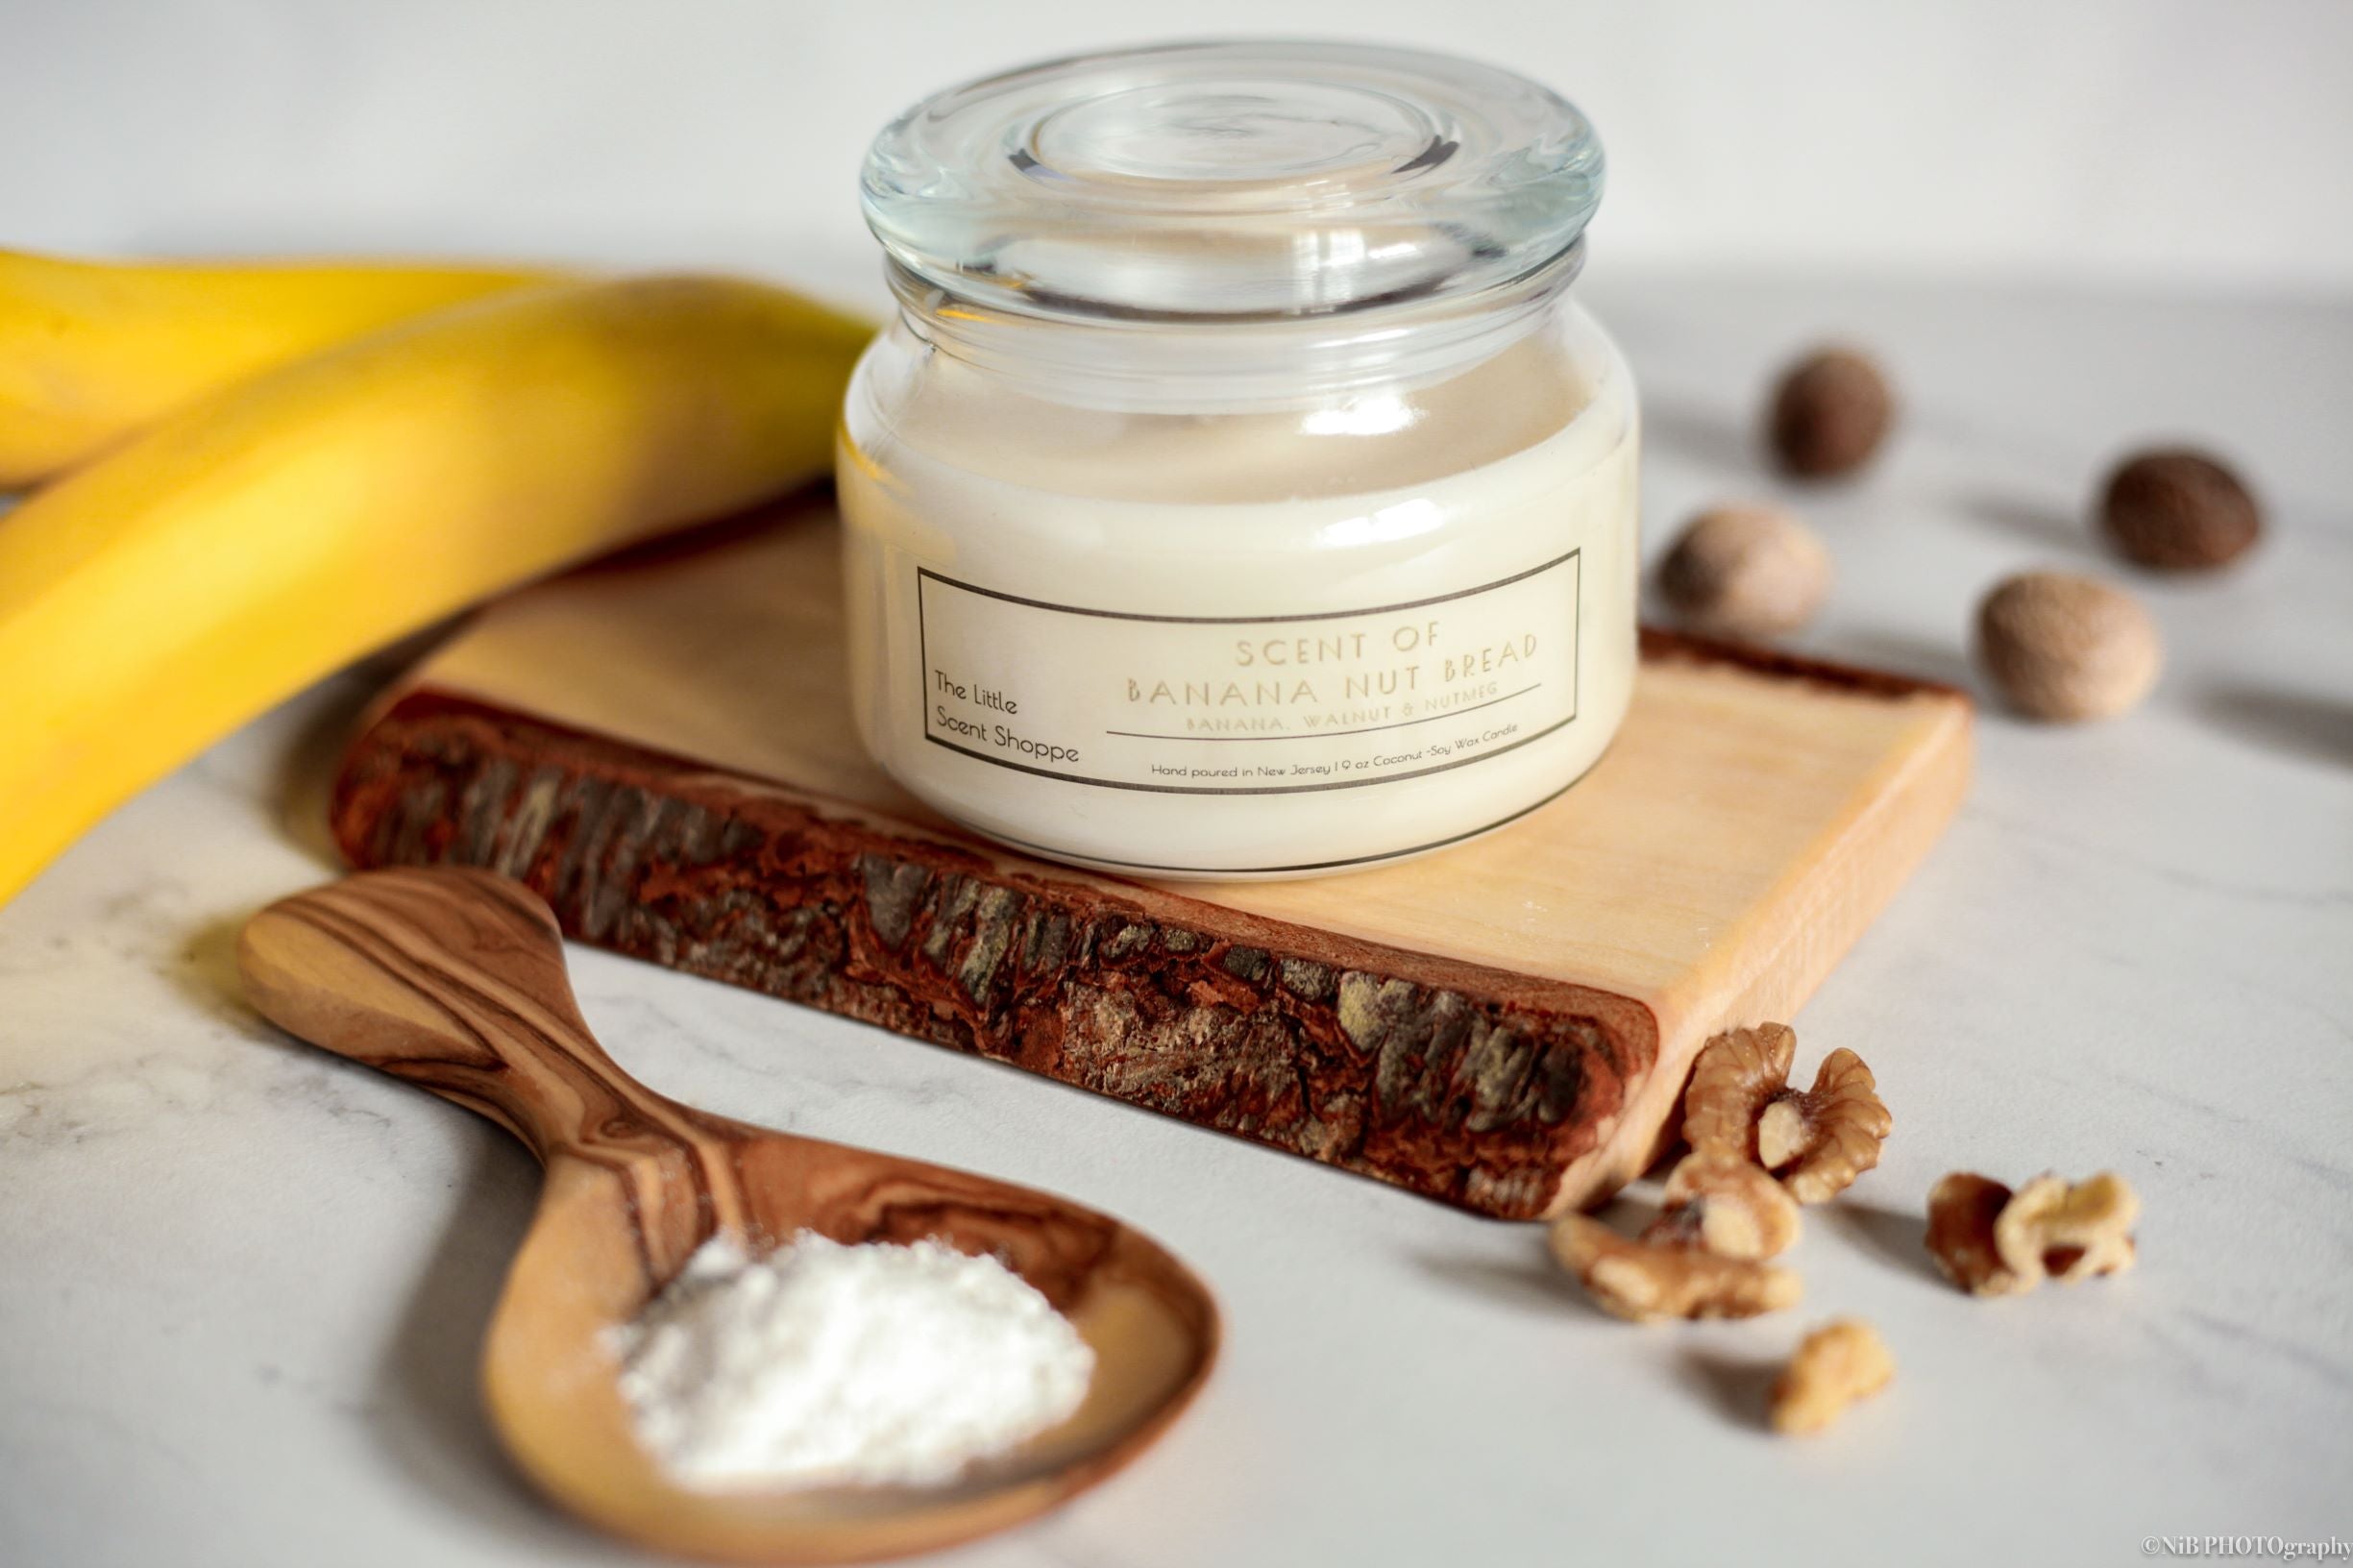 Scent of Banana Nut Bread Candle